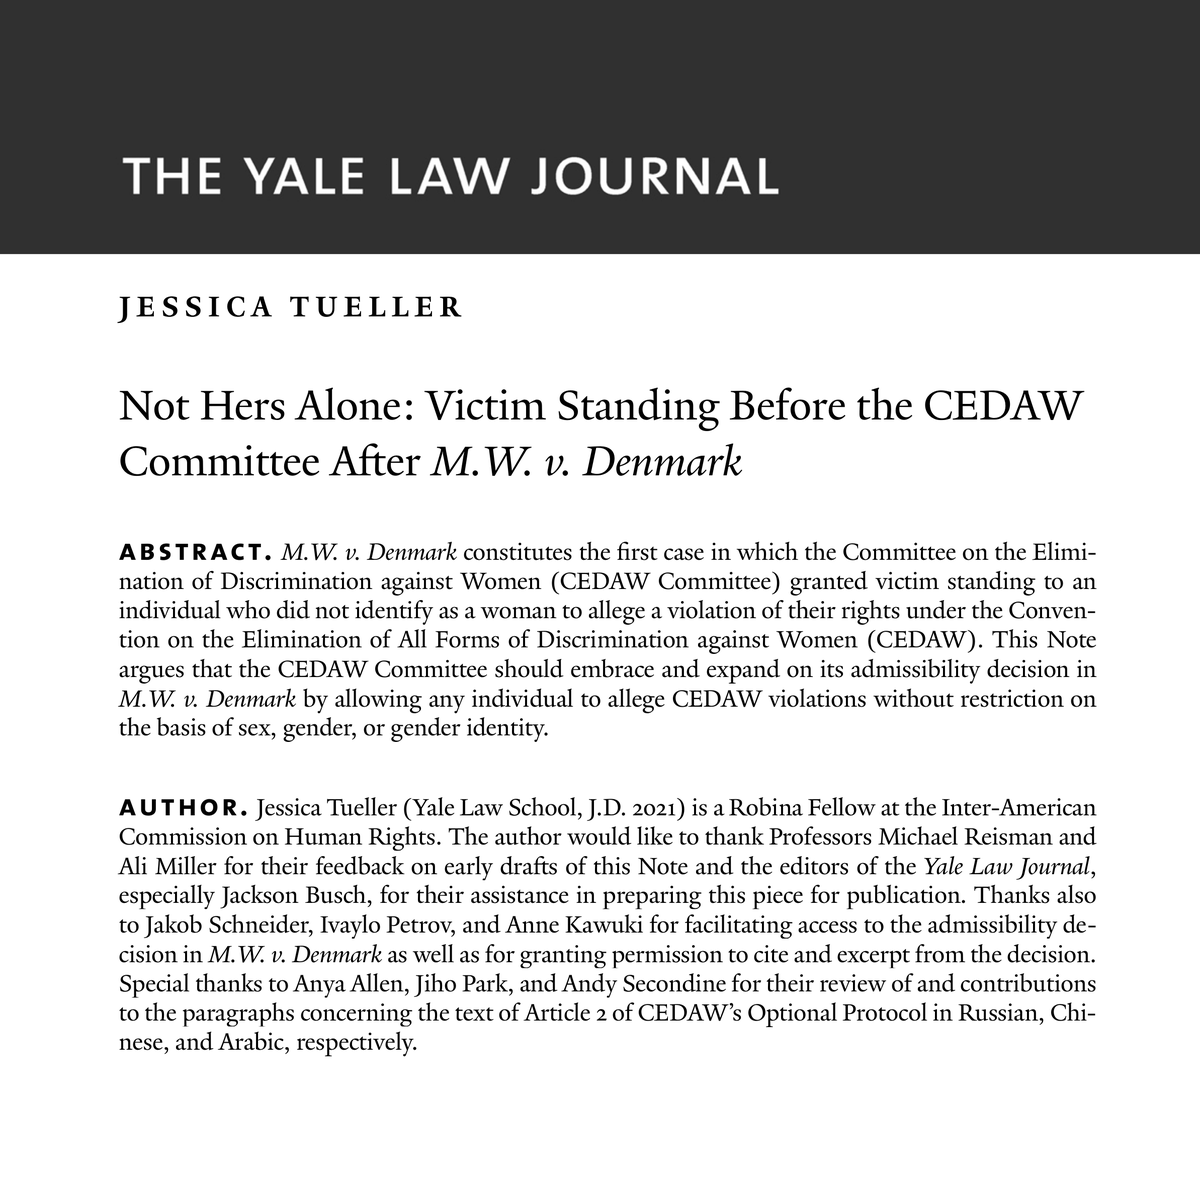 In her Note, Jessica Tueller (@YaleLawSch ’21) argues that the CEDAW Committee should build on its decision in M.W. v. Denmark—where it heard a male child’s claim—by allowing anyone to allege CEDAW violations regardless of sex, gender, or gender identity: yalelawjournal.org/note/not-hers-…